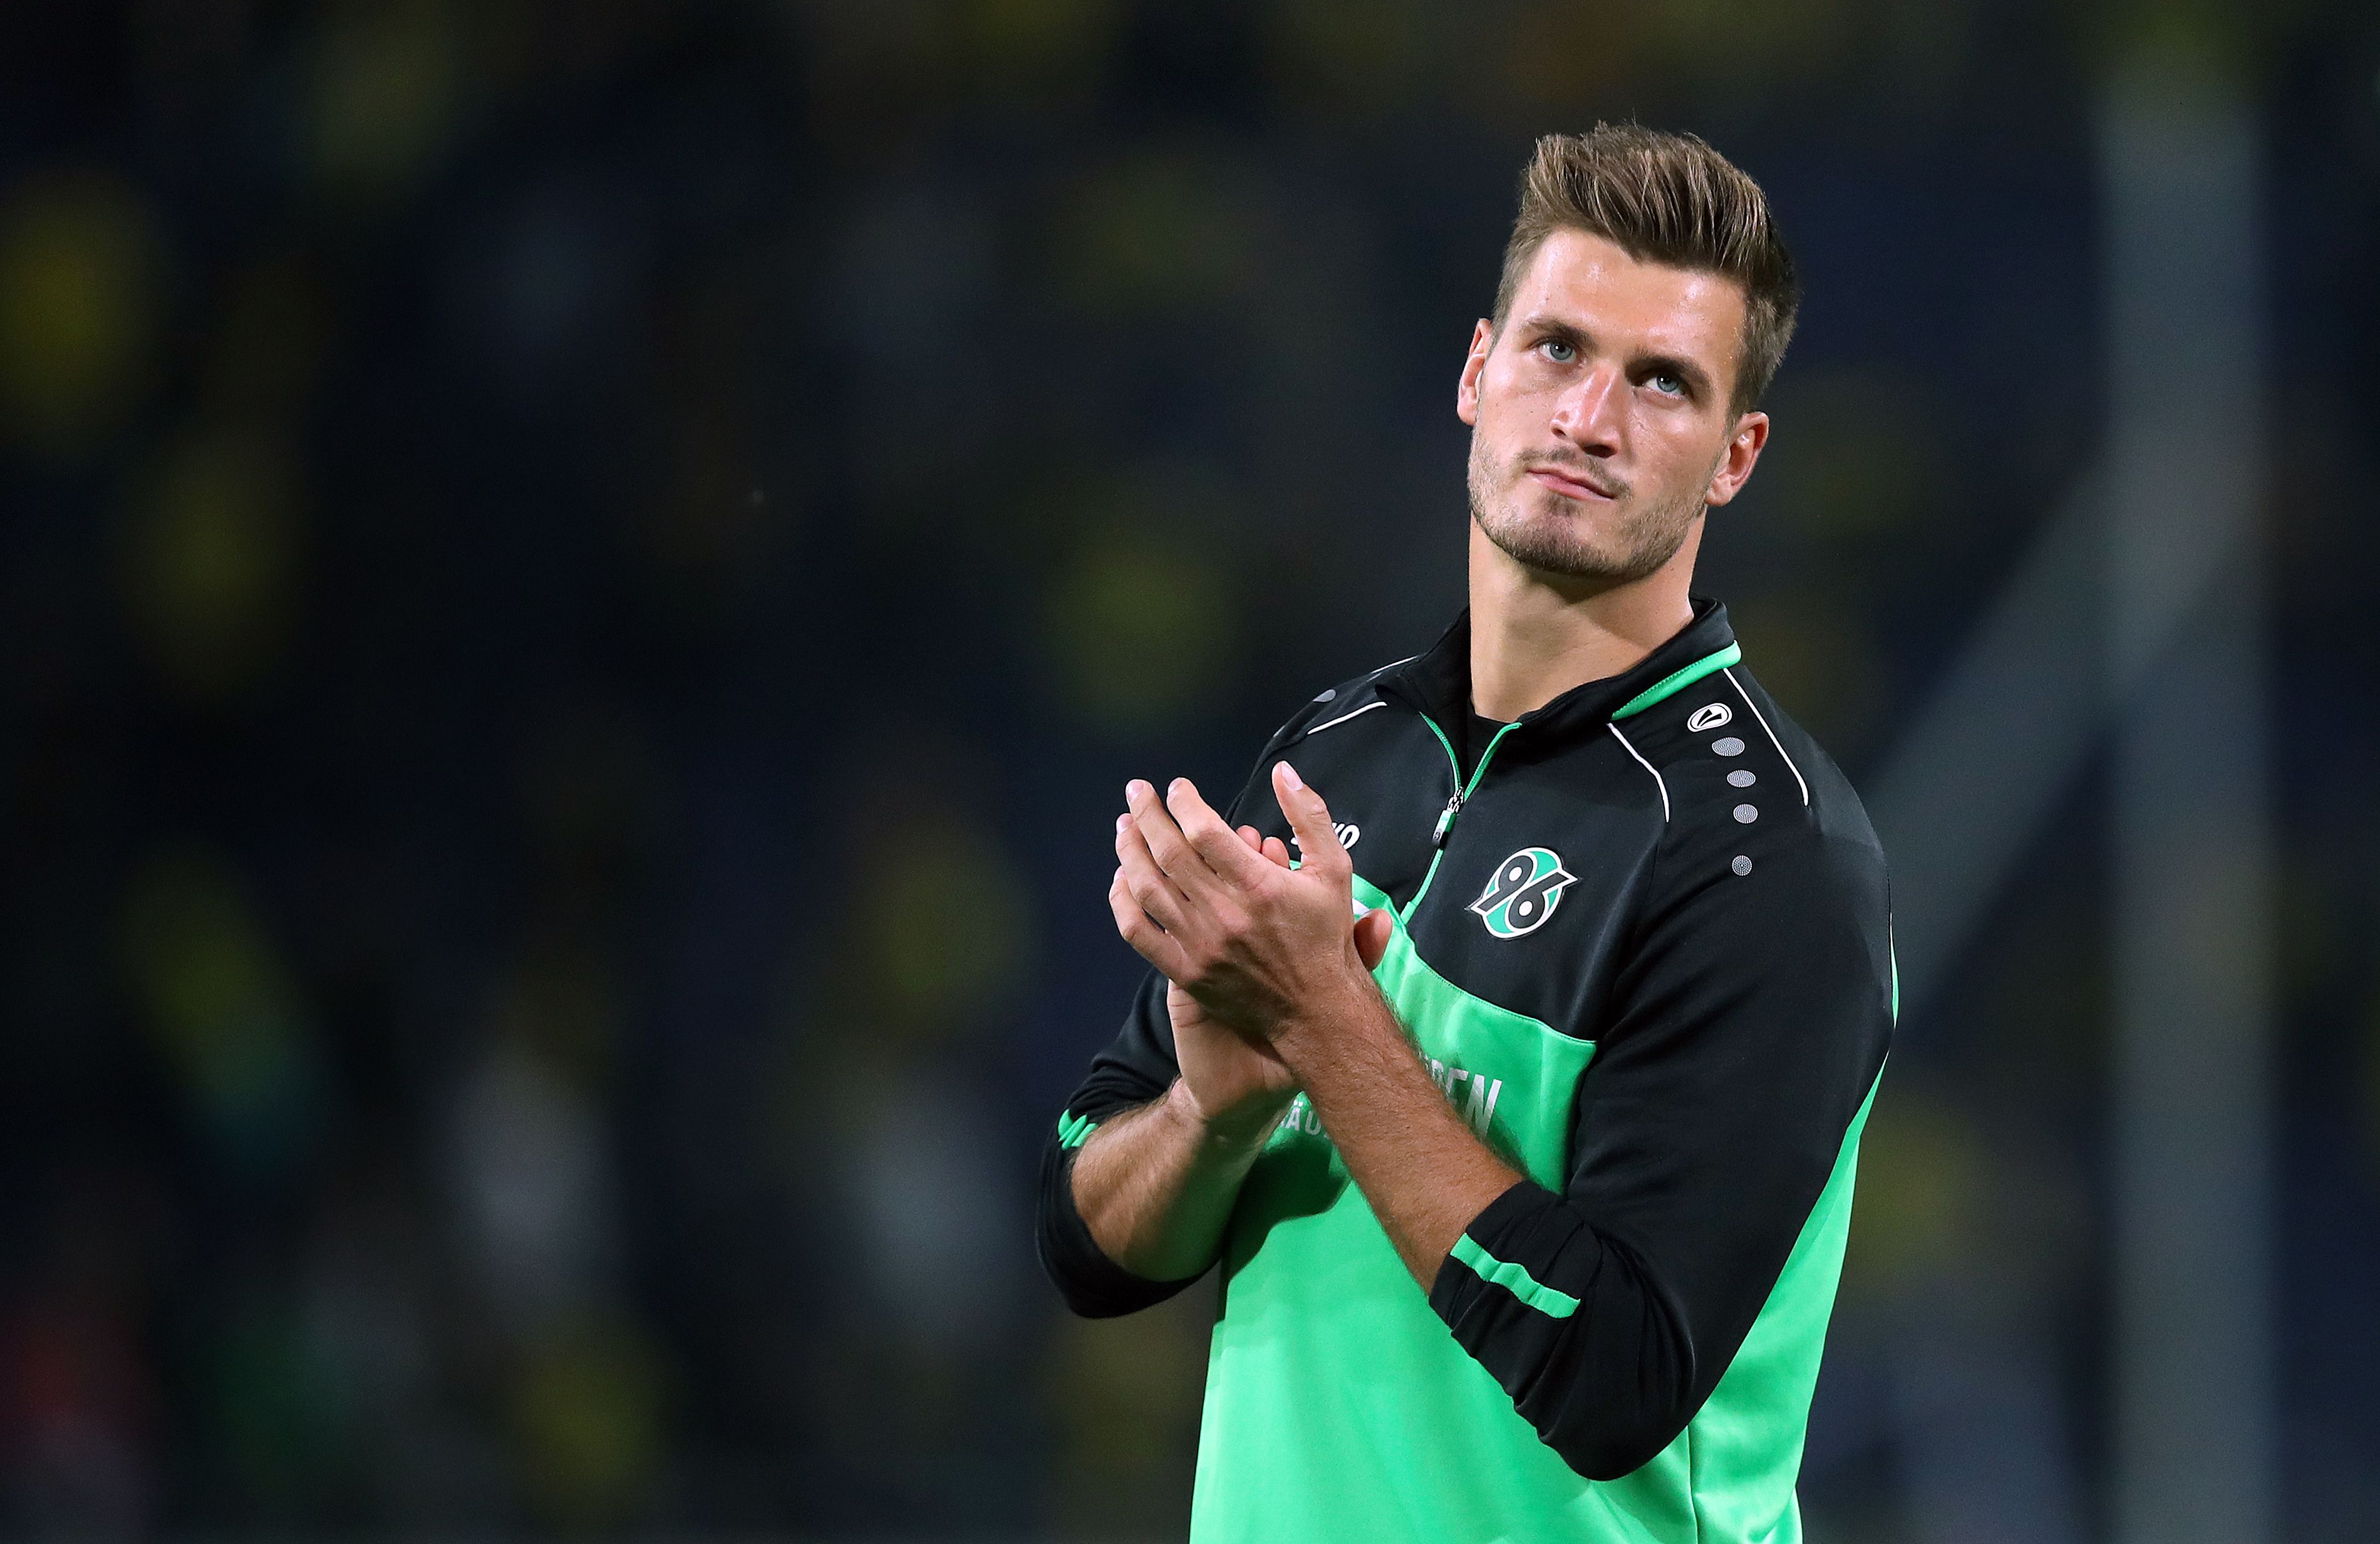 Hanover's German midfielder Hendrik Weydandt applauds the fans after the German first division Bundesliga football match Hannover 96 vs Borussia Dortmund in Hanover, northern Germany, on August 31, 2018. (Photo by Ronny Hartmann / AFP) / RESTRICTIONS: DFL REGULATIONS PROHIBIT ANY USE OF PHOTOGRAPHS AS IMAGE SEQUENCES AND/OR QUASI-VIDEO        (Photo credit should read RONNY HARTMANN/AFP/Getty Images)